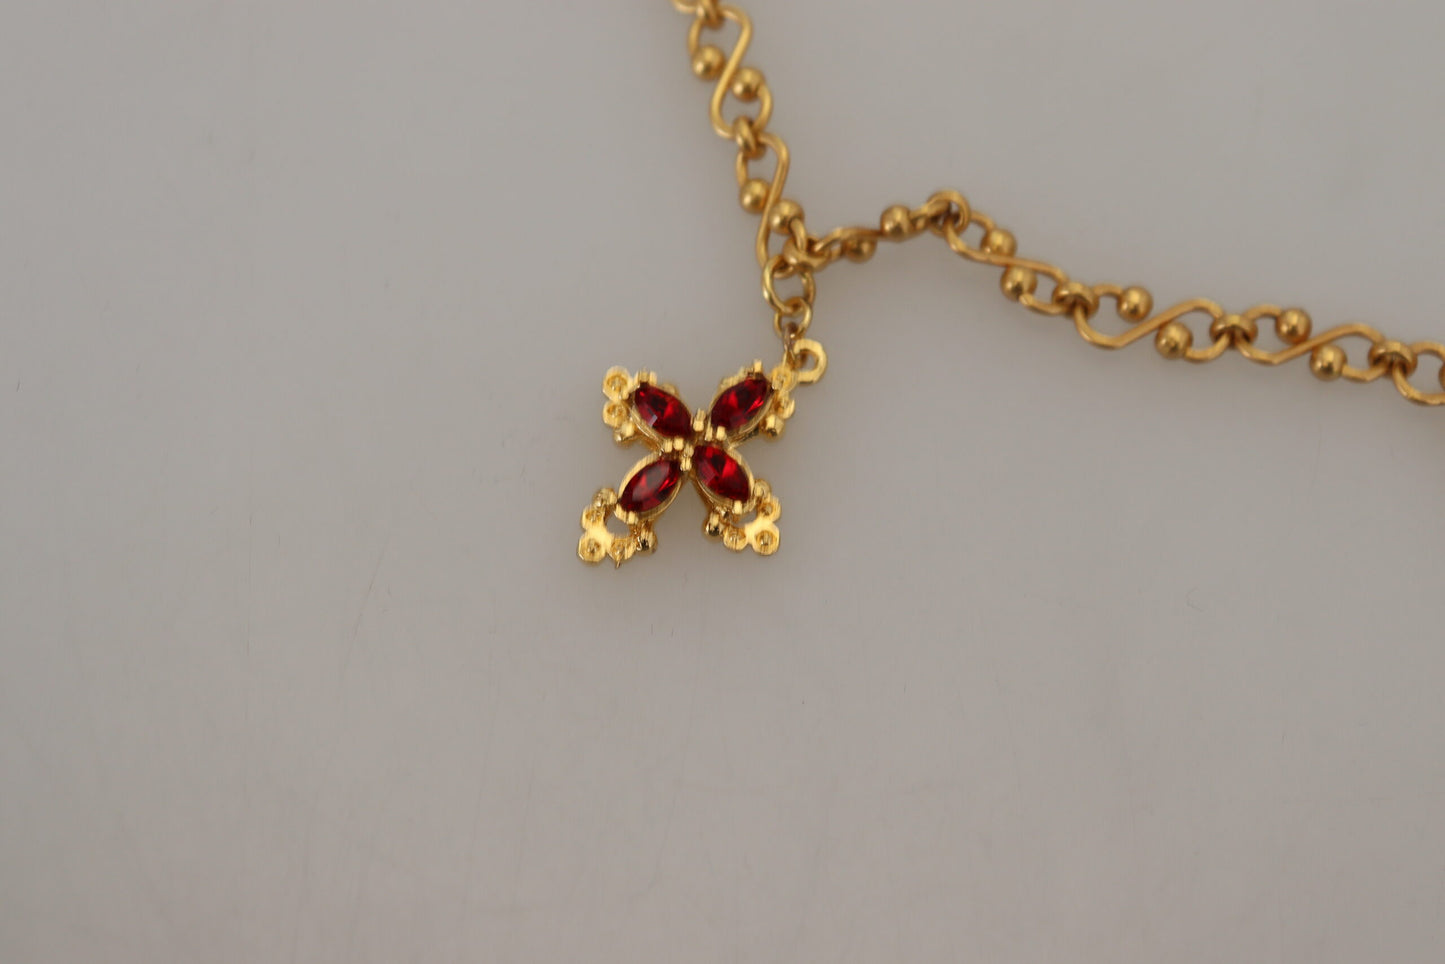 Gold Tone Cross Charm Necklace